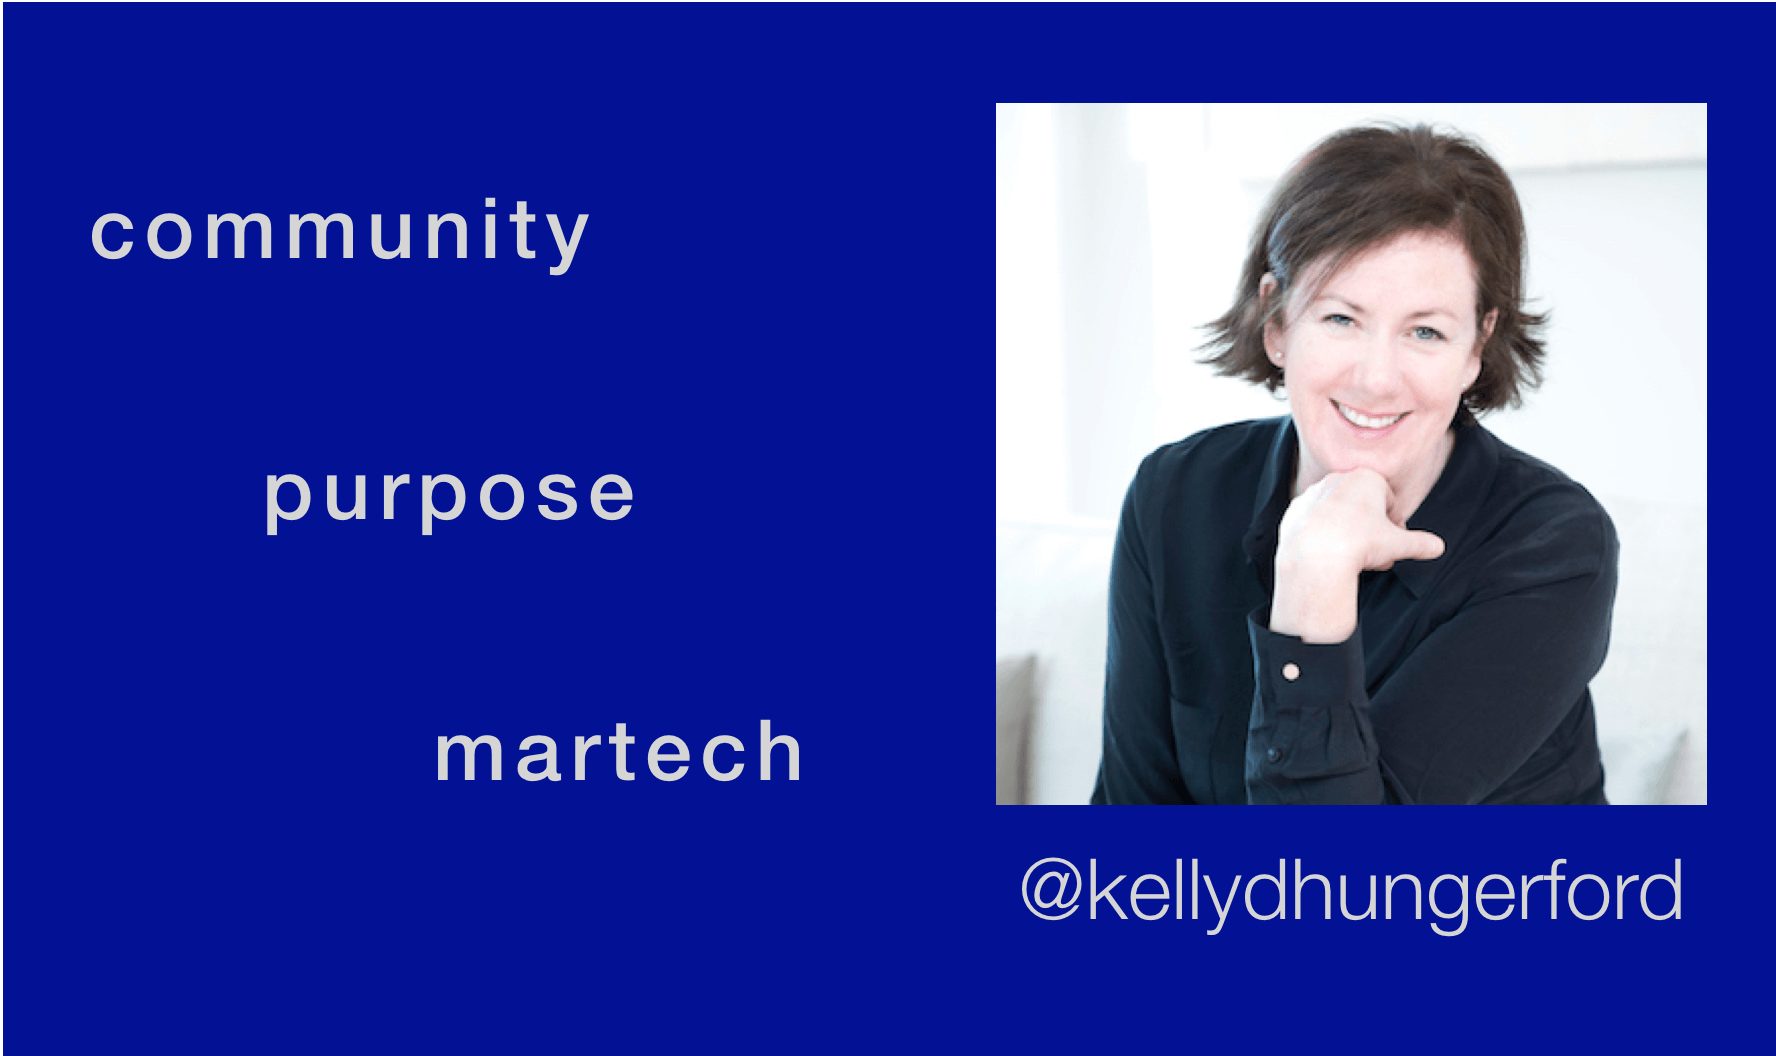 The state of marketing technology, building community and purpose into your brand experience with Kelly Hungerford (MDE277)